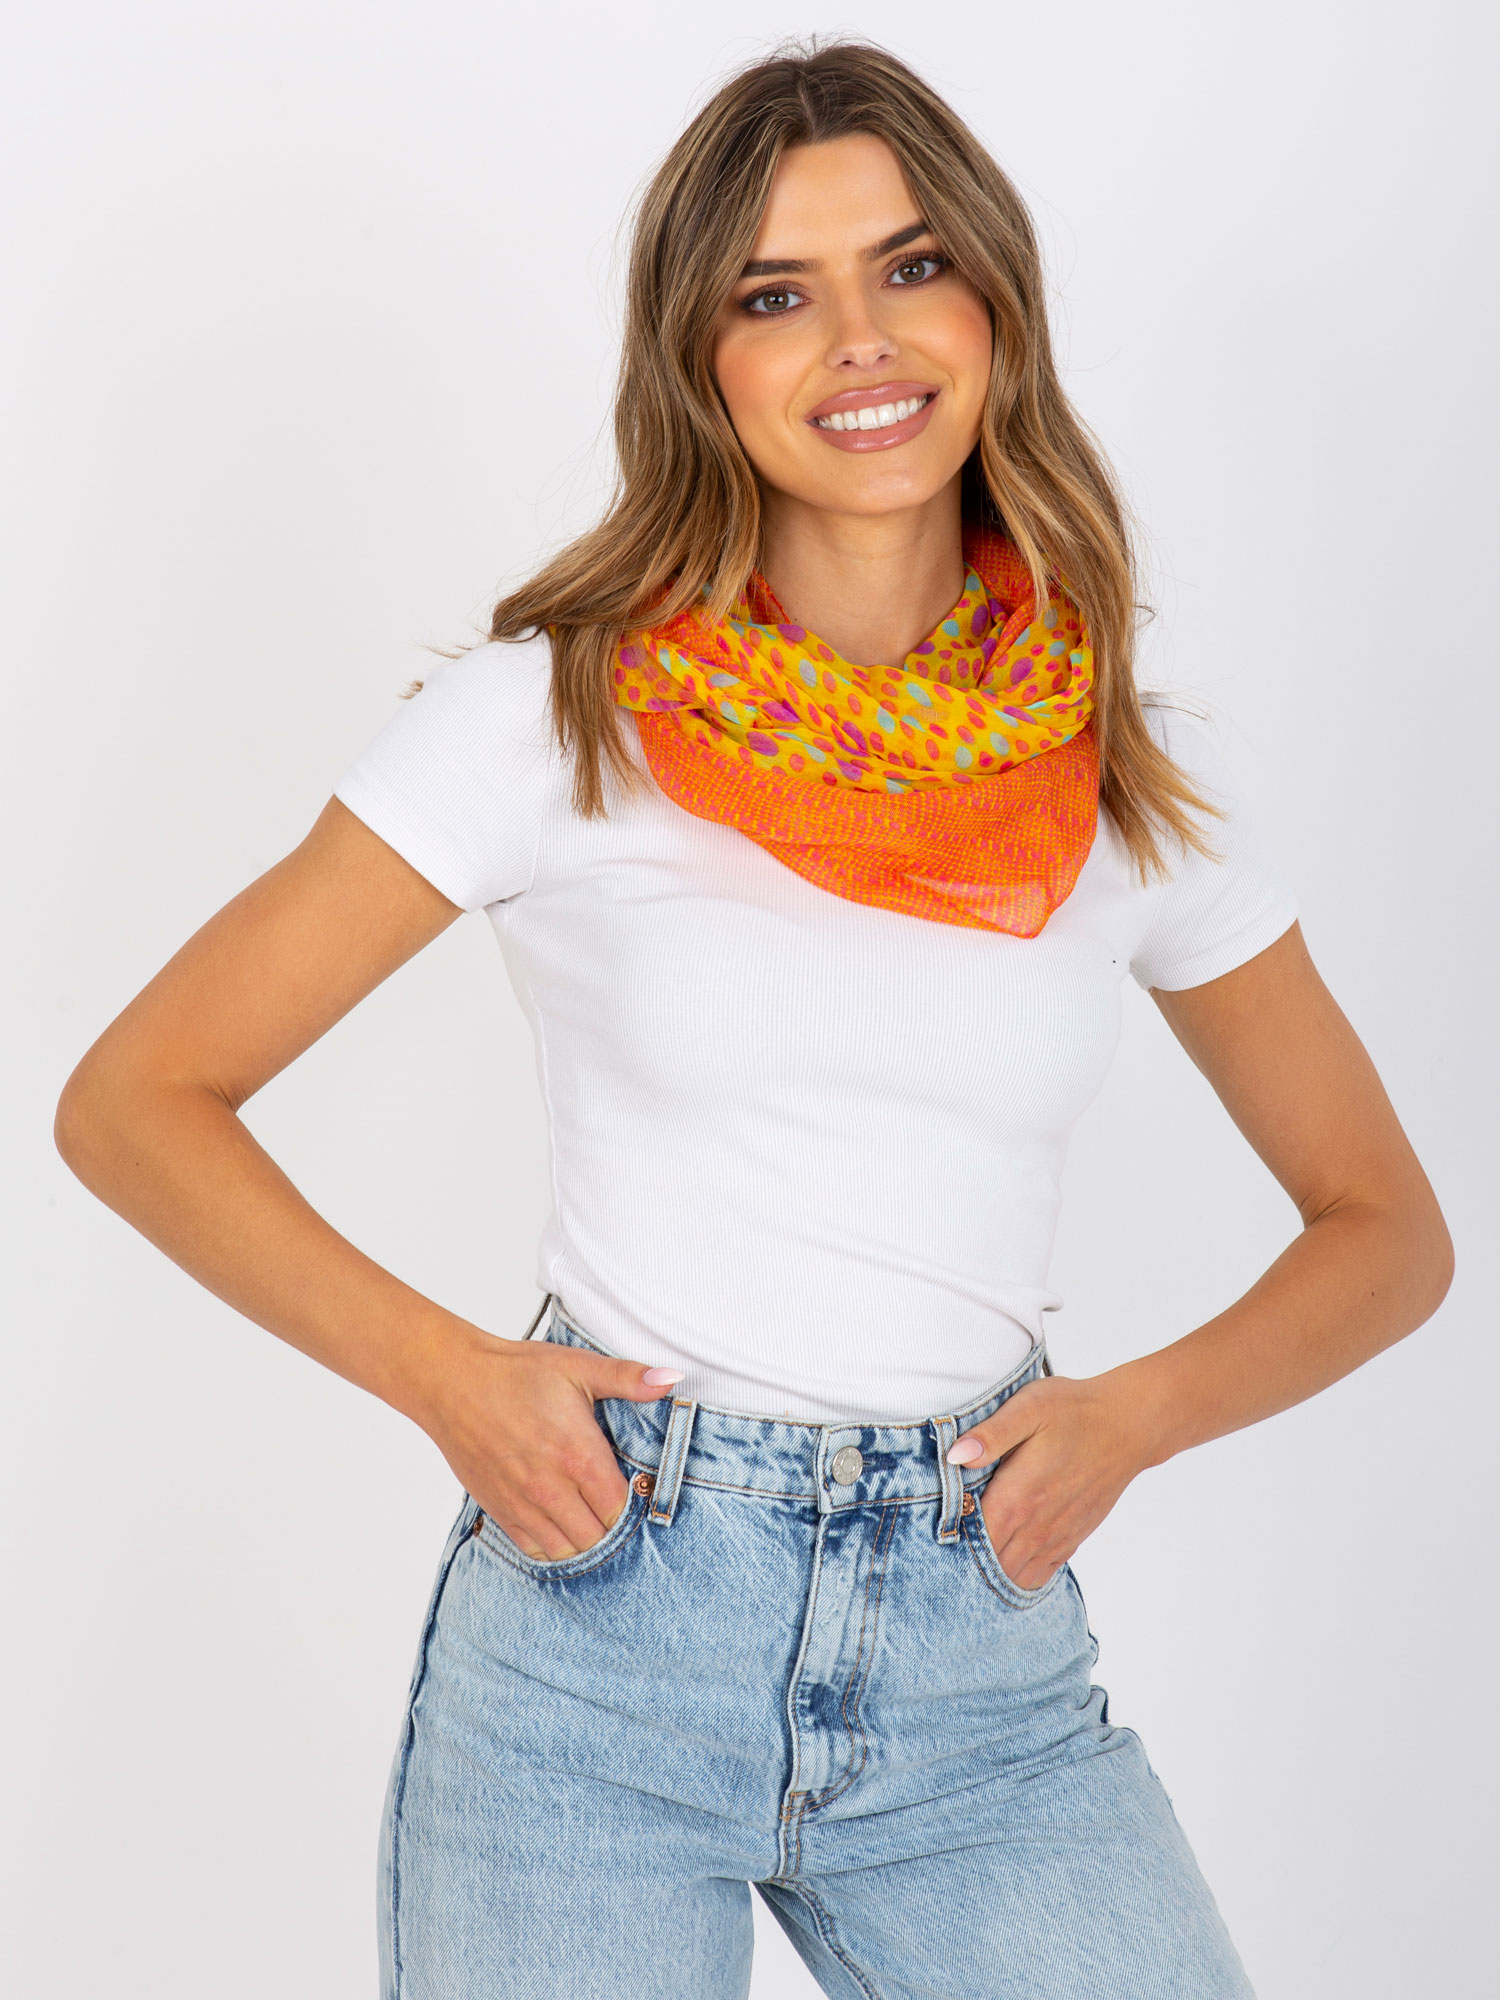 Yellow and orange scarf with polka dots